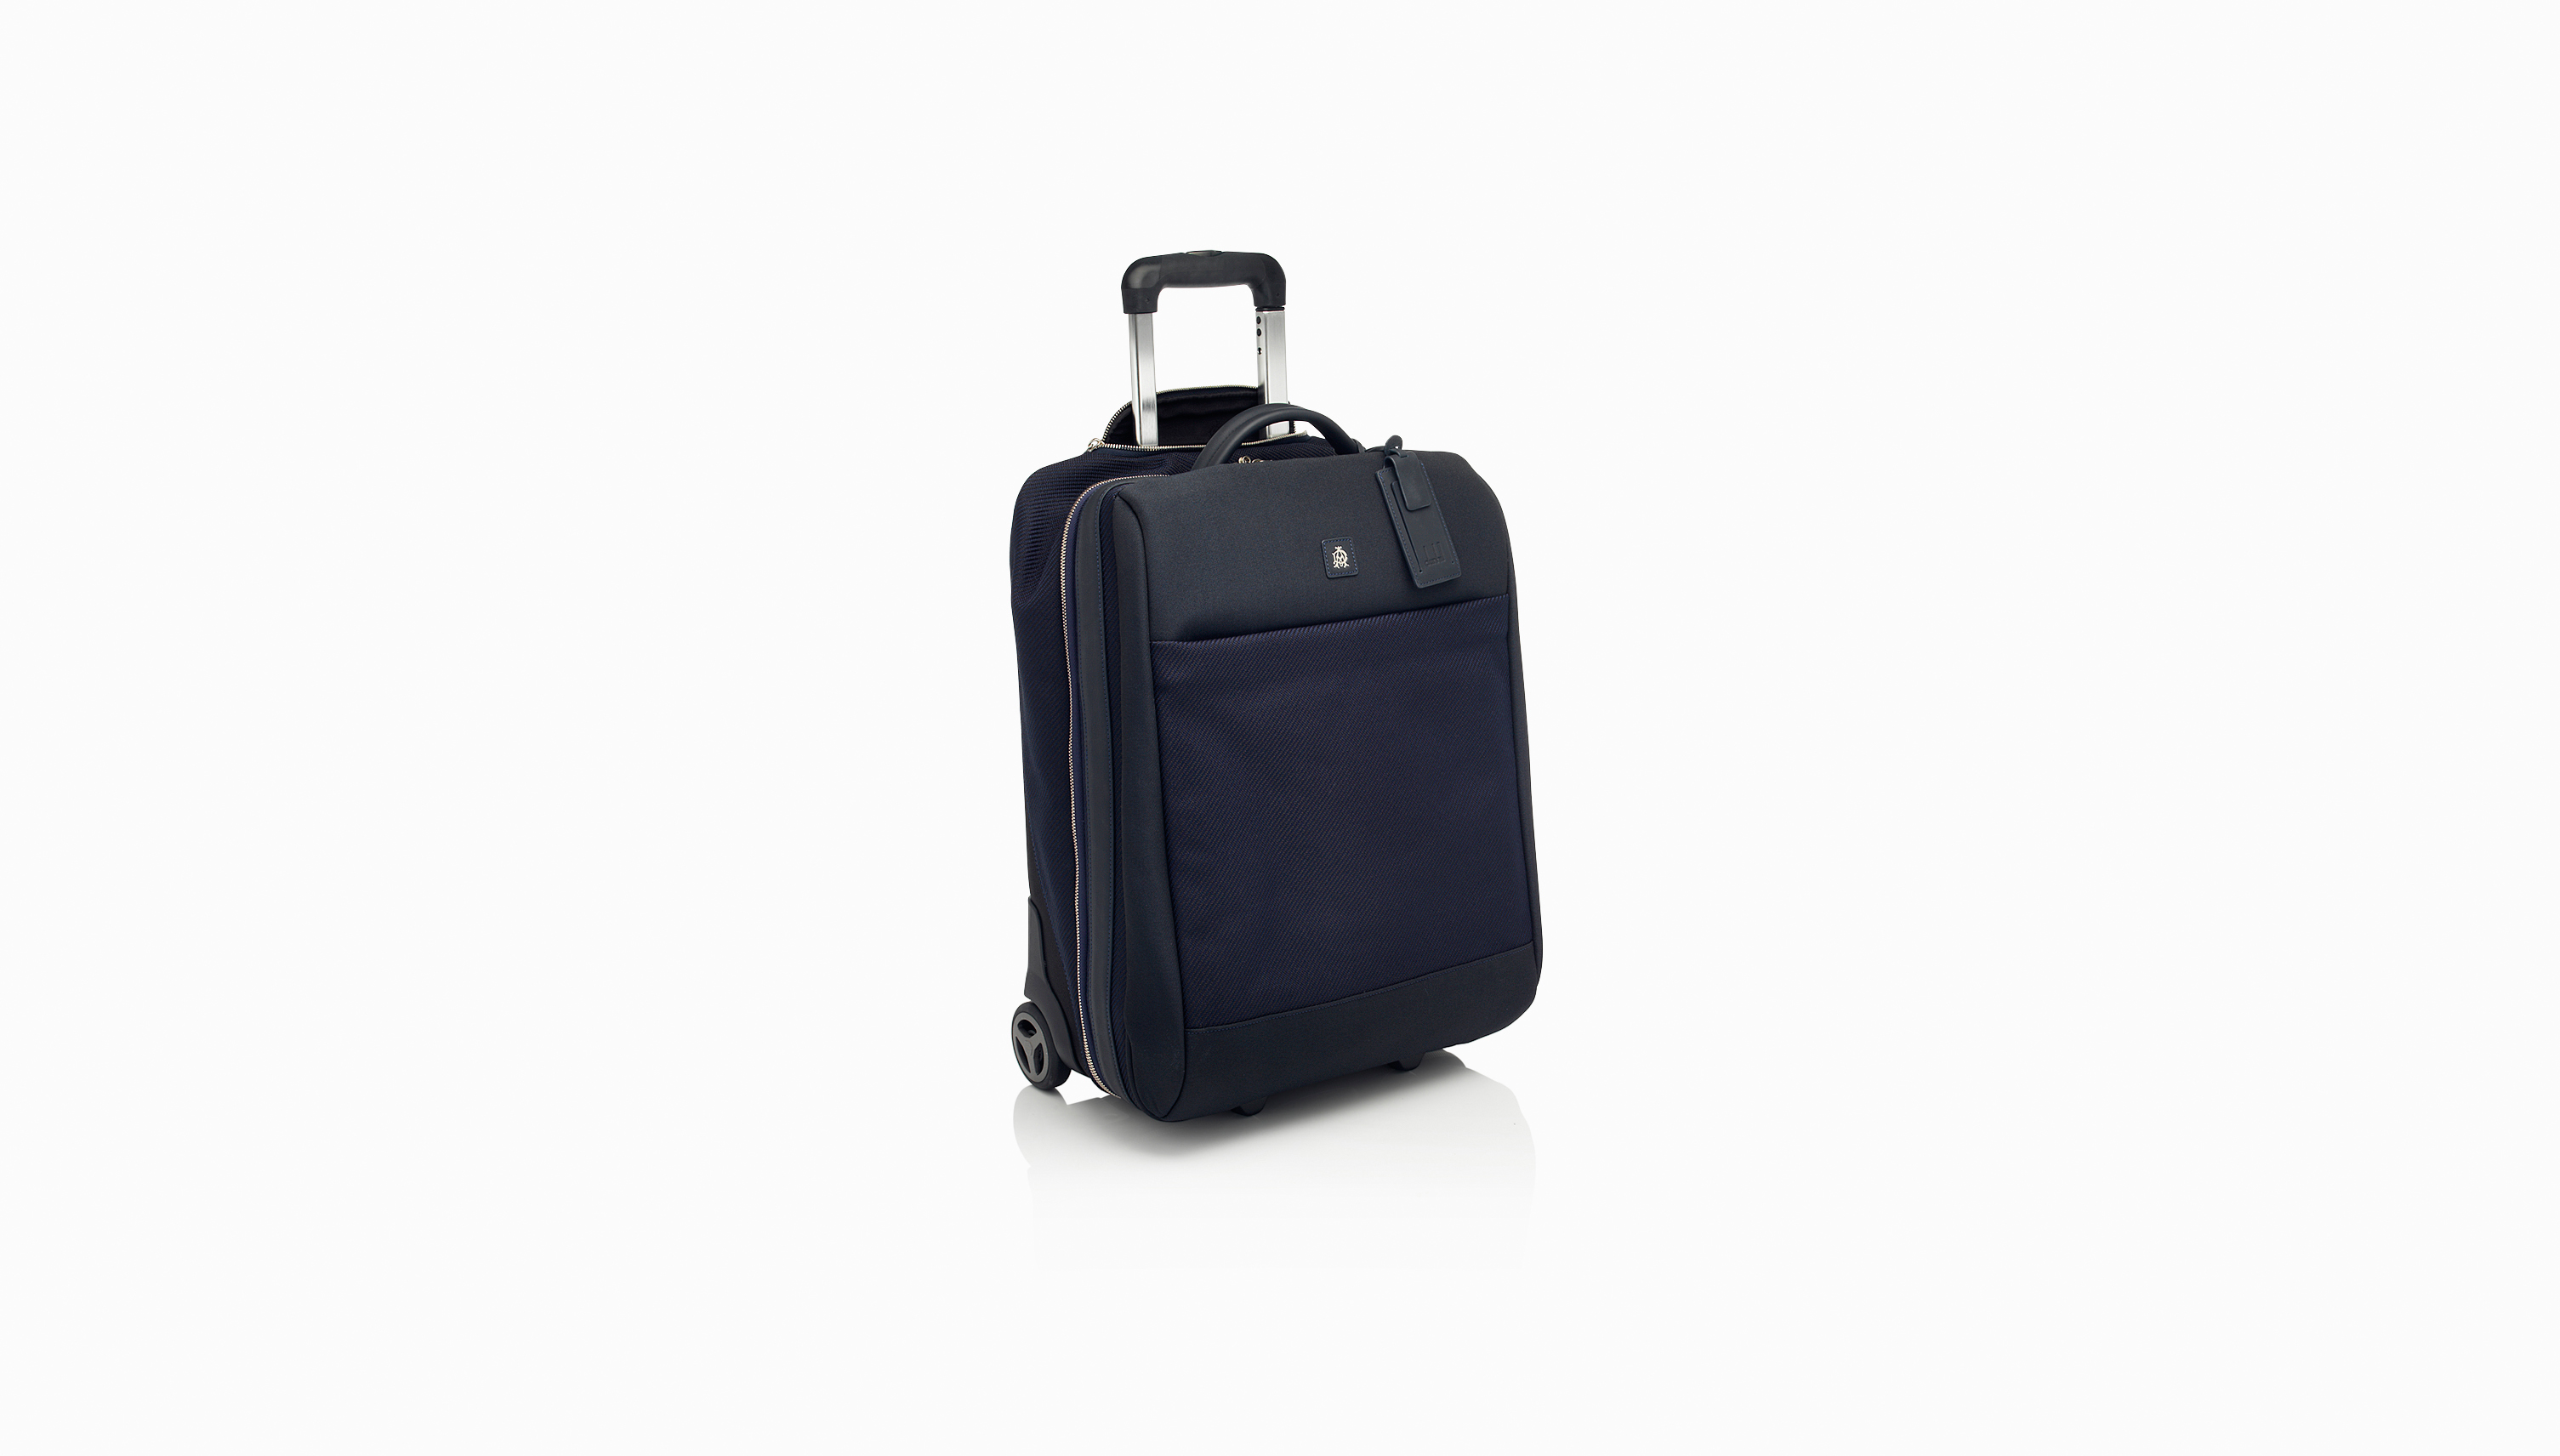 alfred dunhill luggage